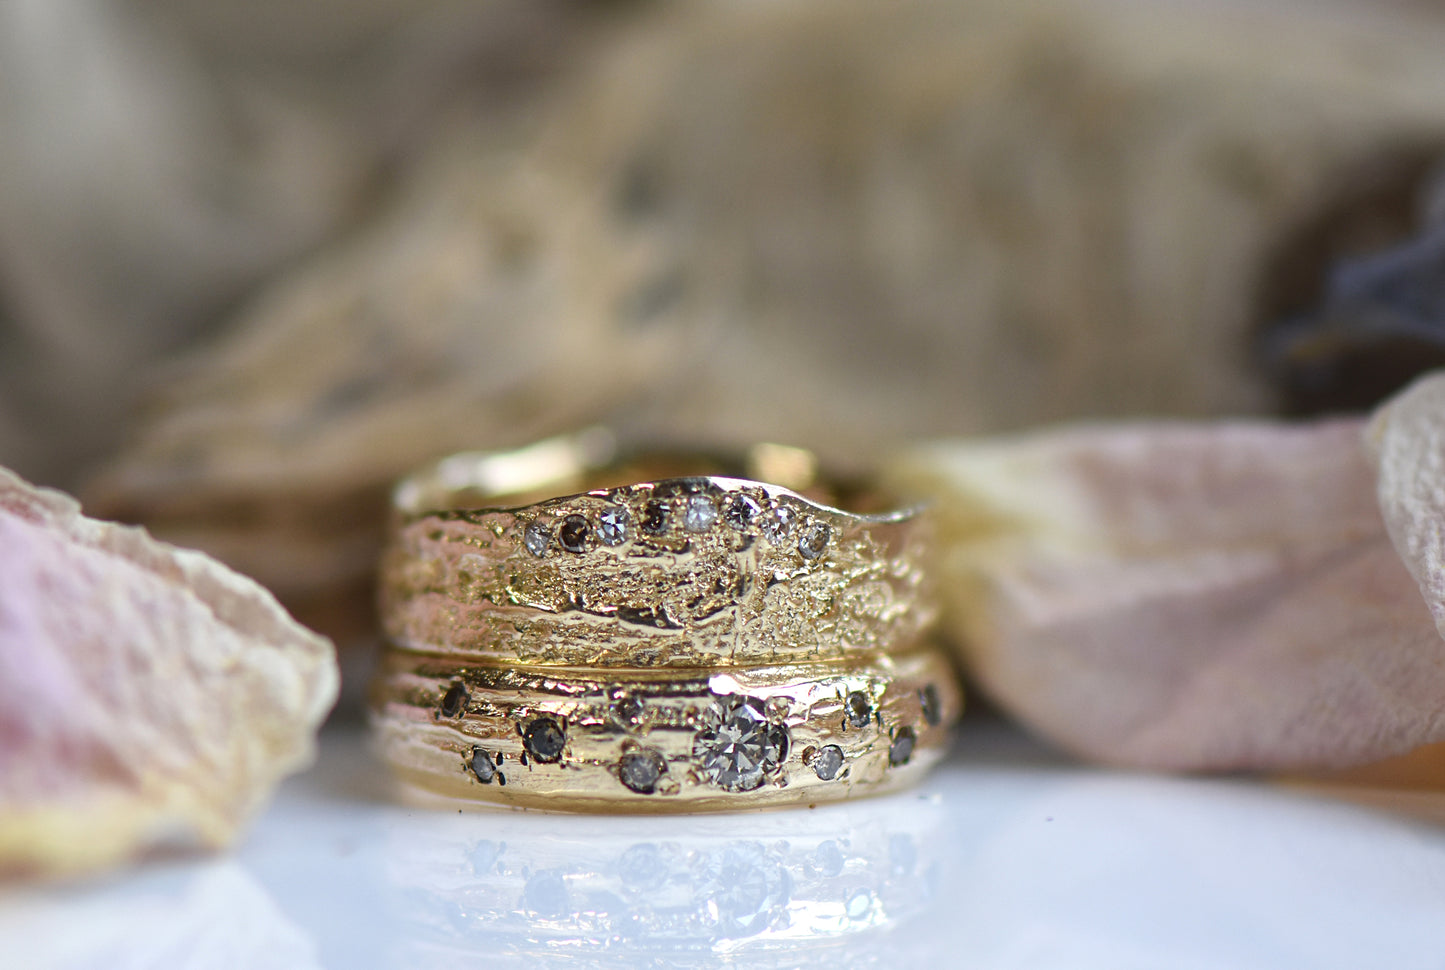 14ct Gold London Plane Ring with Champagne Diamonds